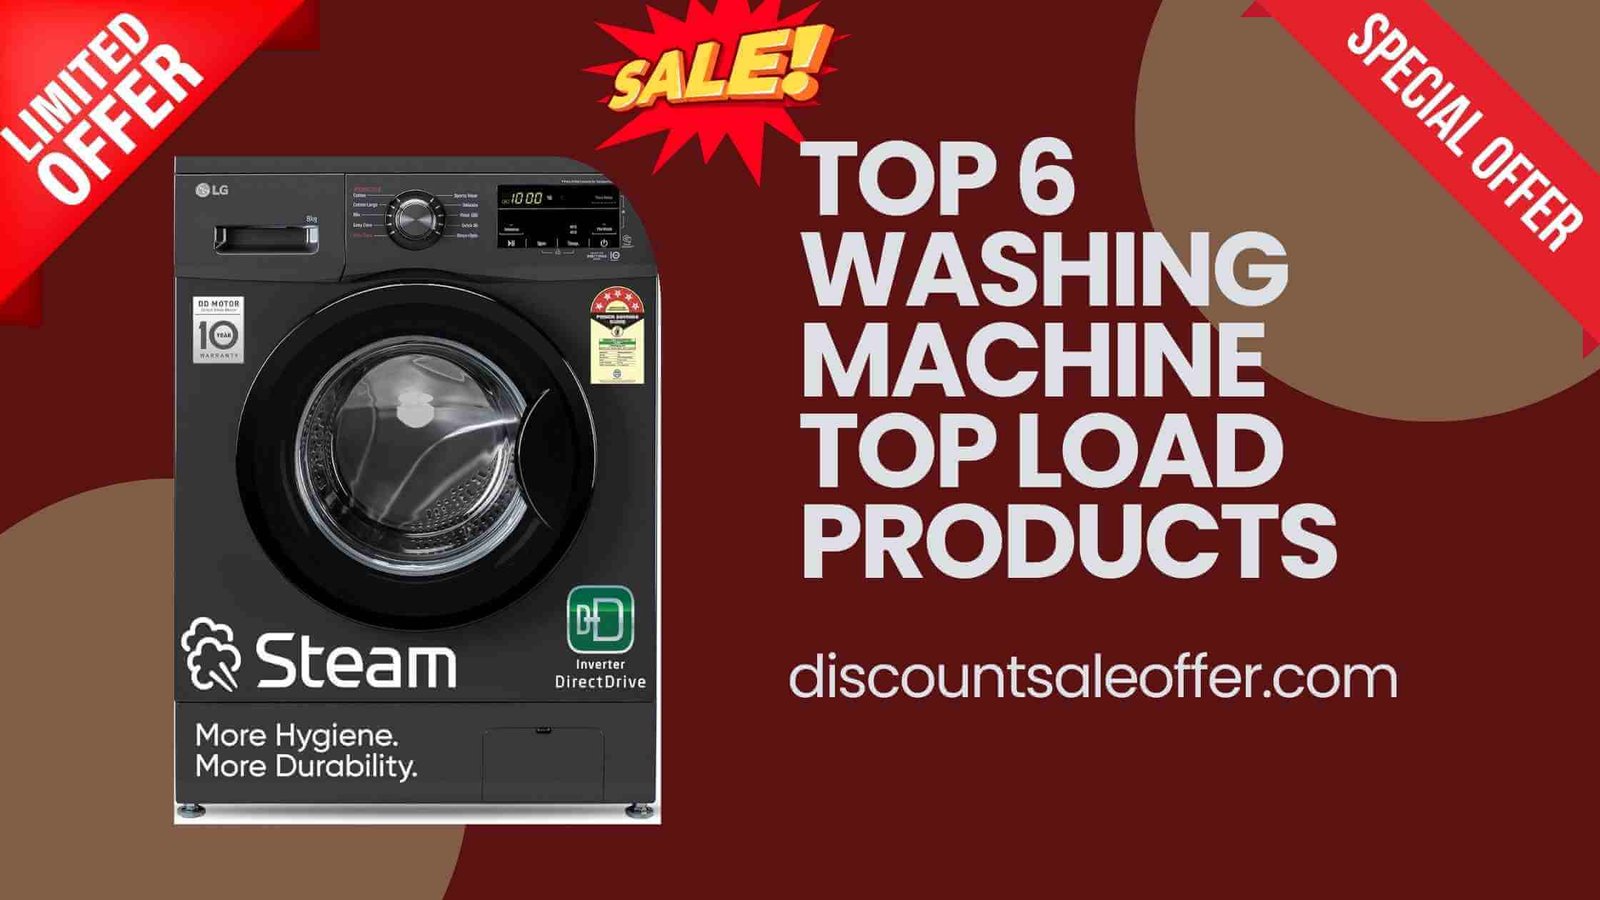 Top 6 Washing Machine Top Load Products